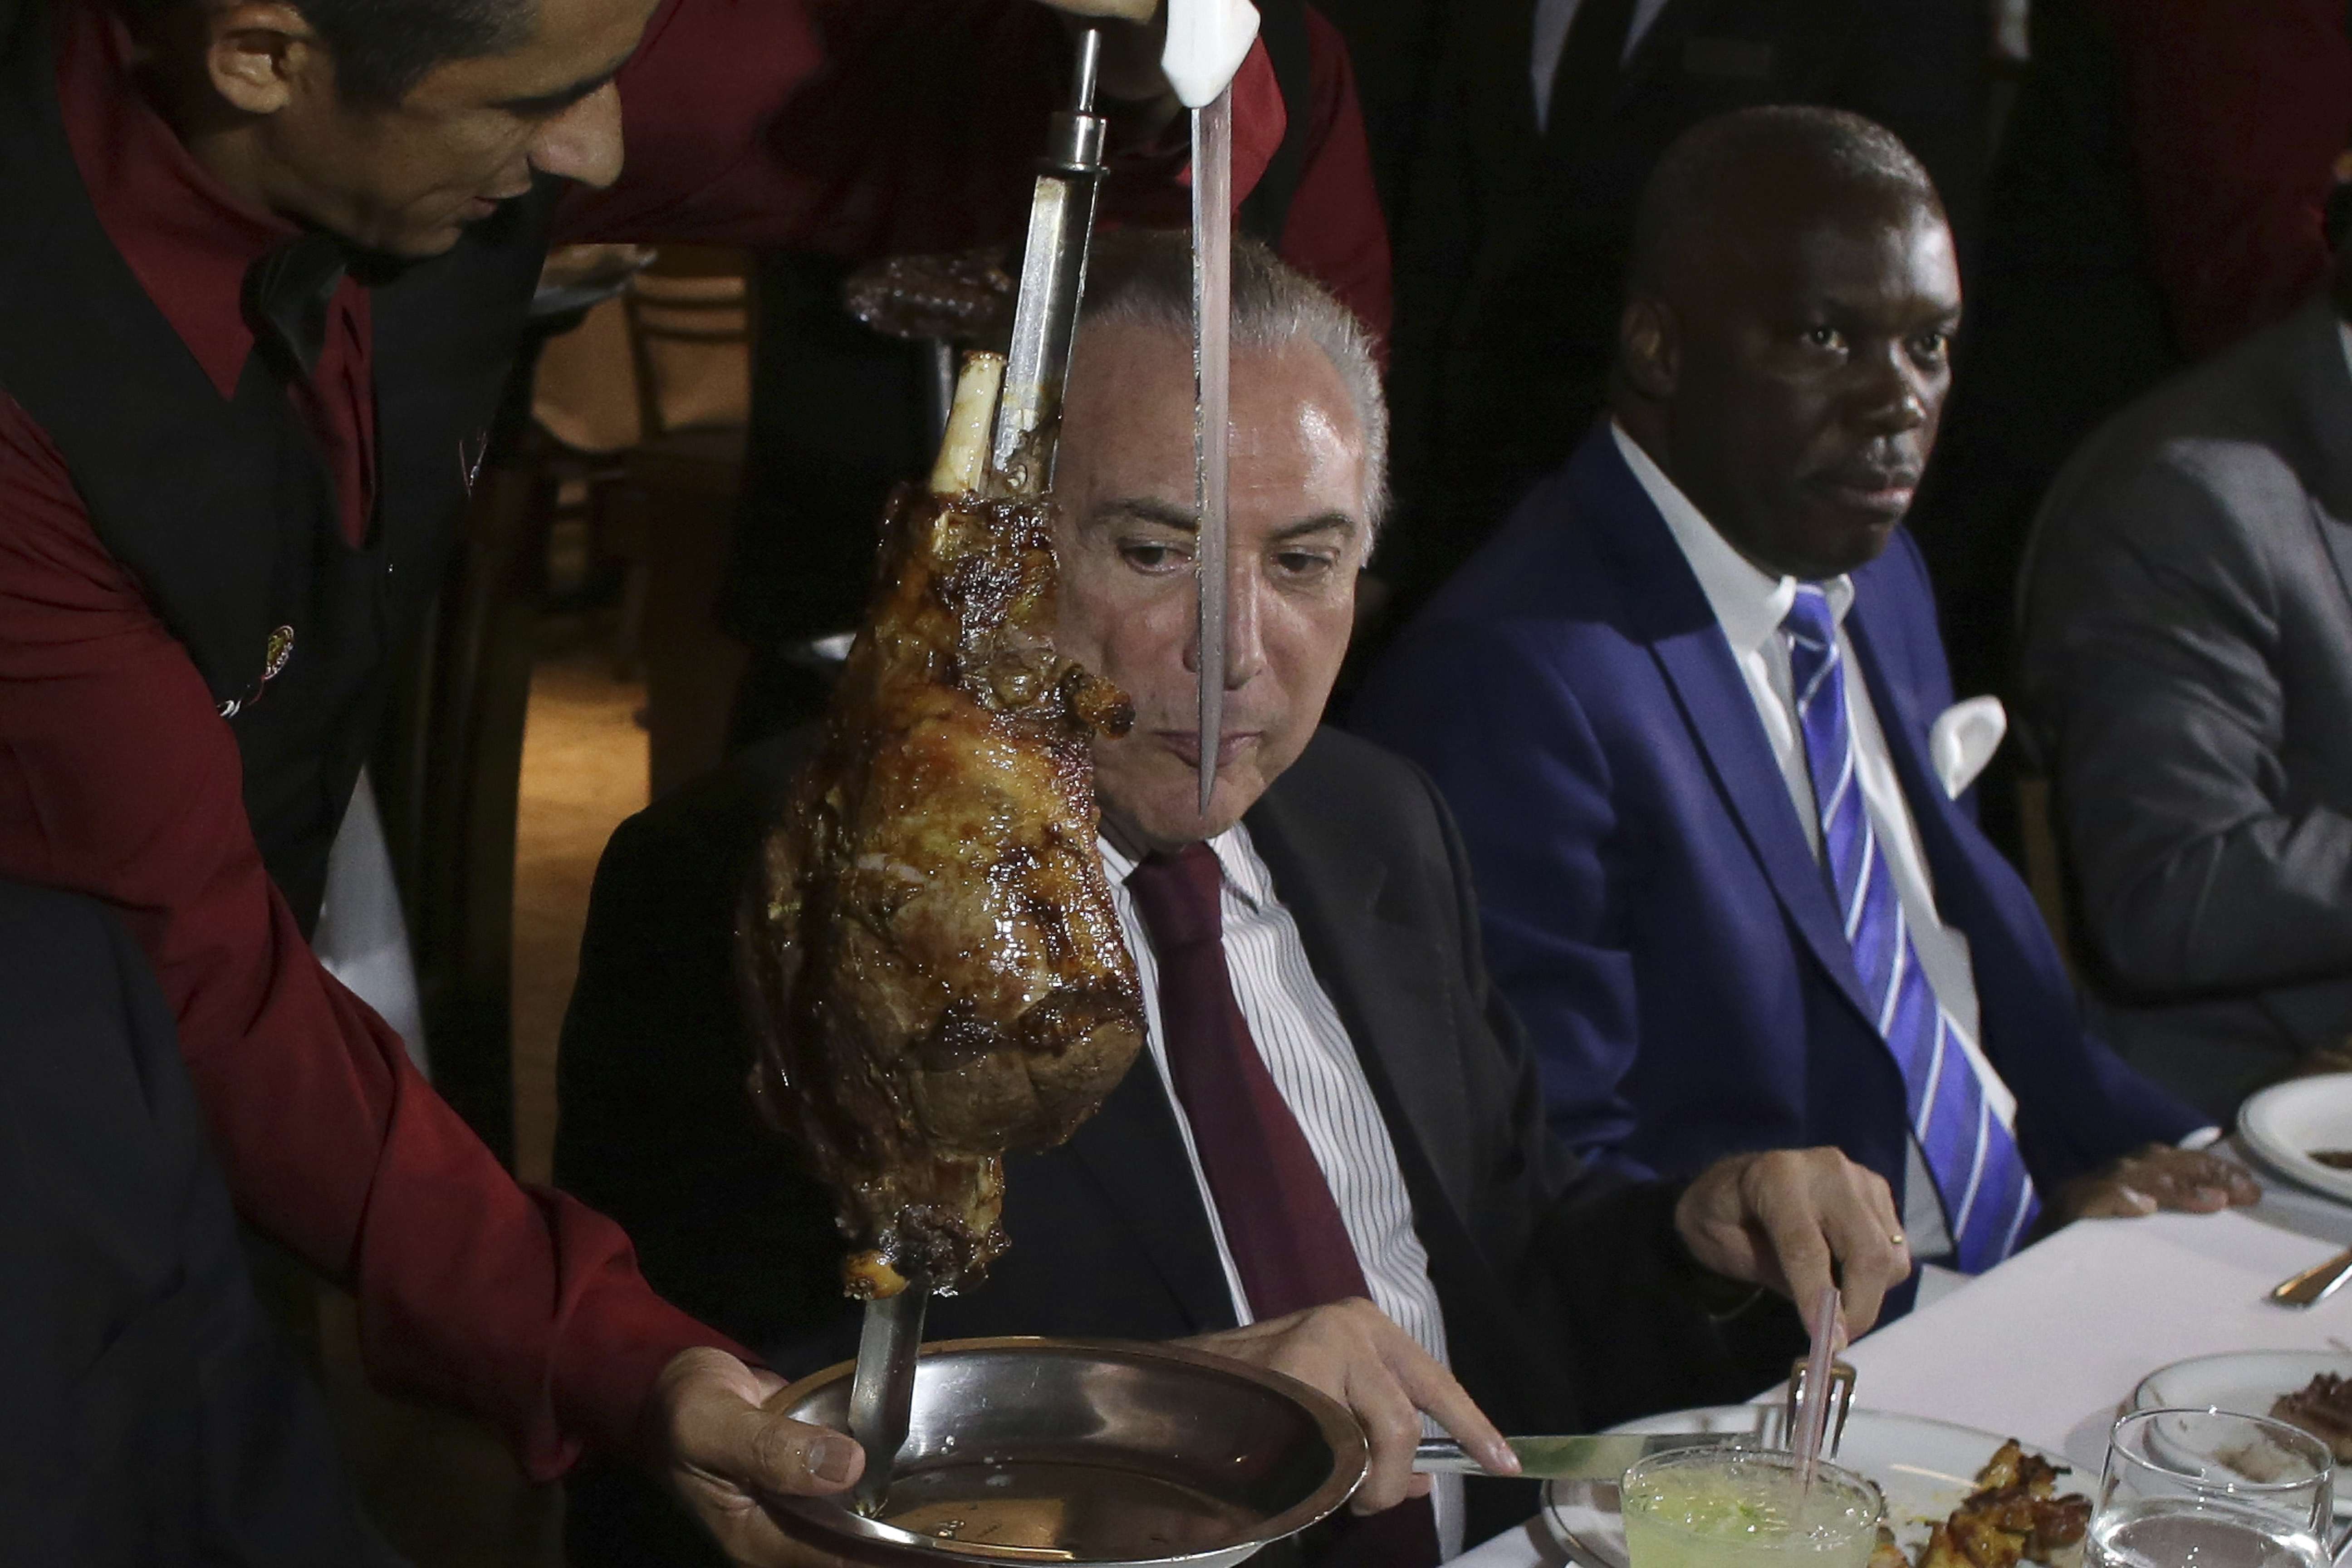 Brazilian President Michel Temer attends a steak dinner at a traditional Brazilian barbecue restaurant after a meeting on the rotten meat scandal. Photo: AP